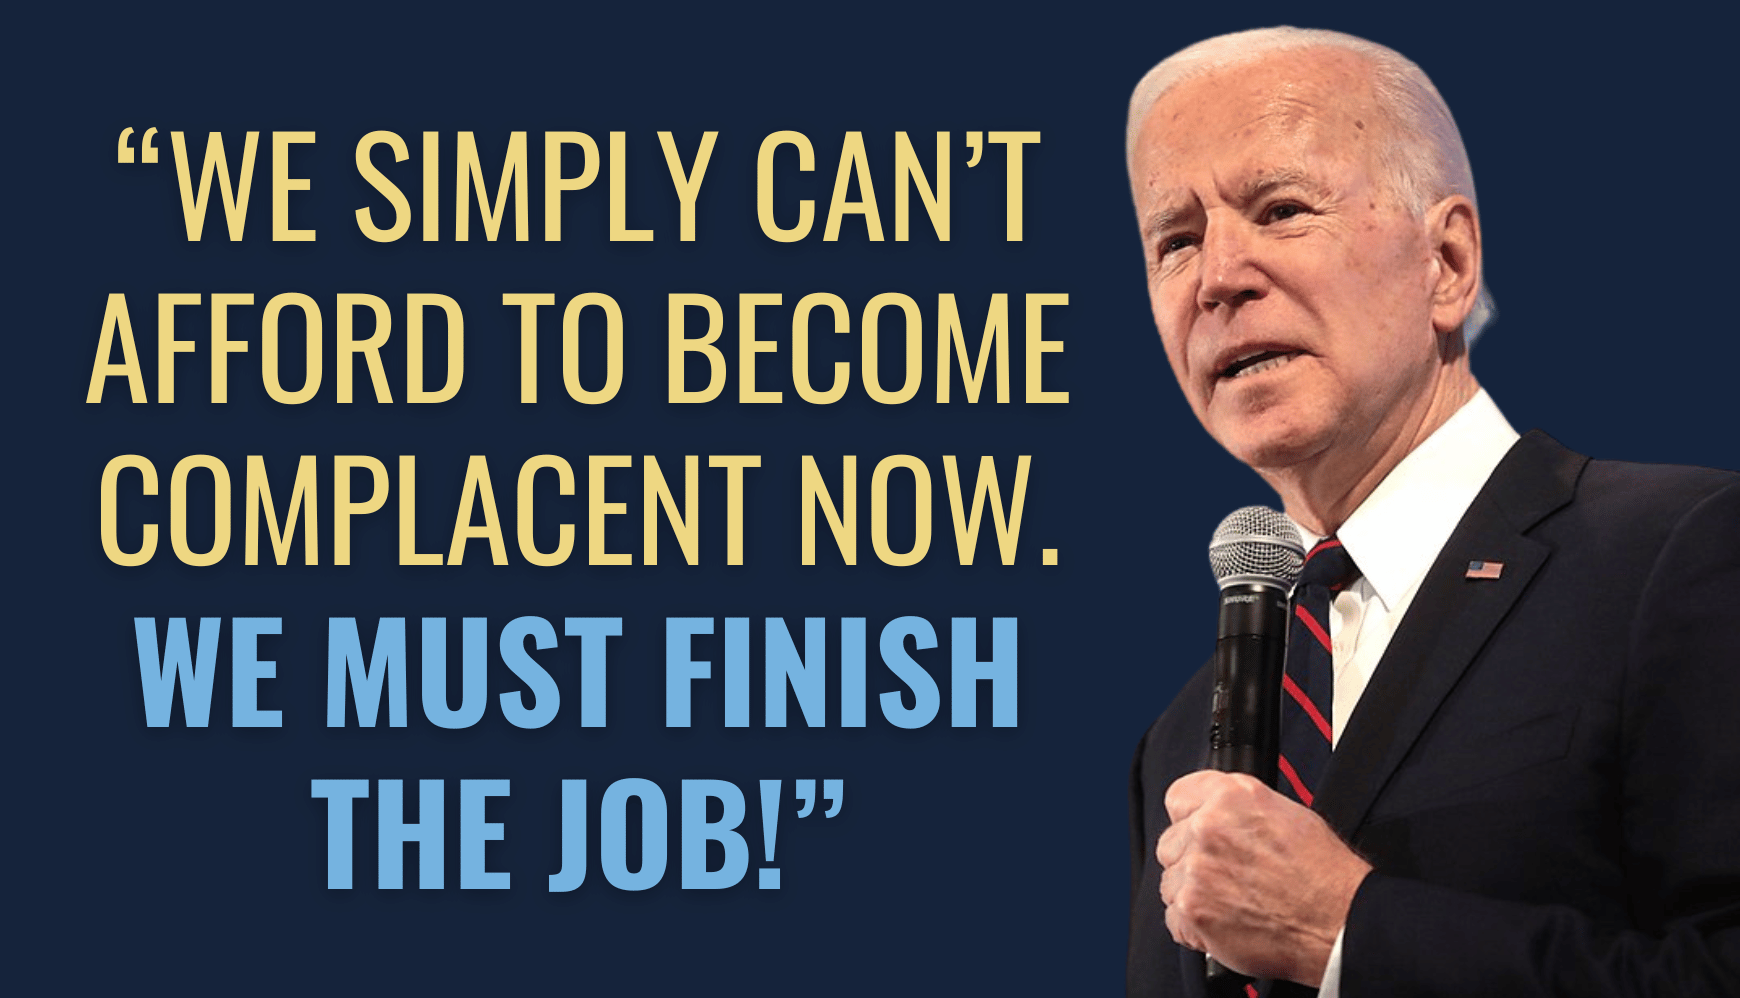 Joe Biden: “We simply can’t afford to become complacent now. We must finish the job!”